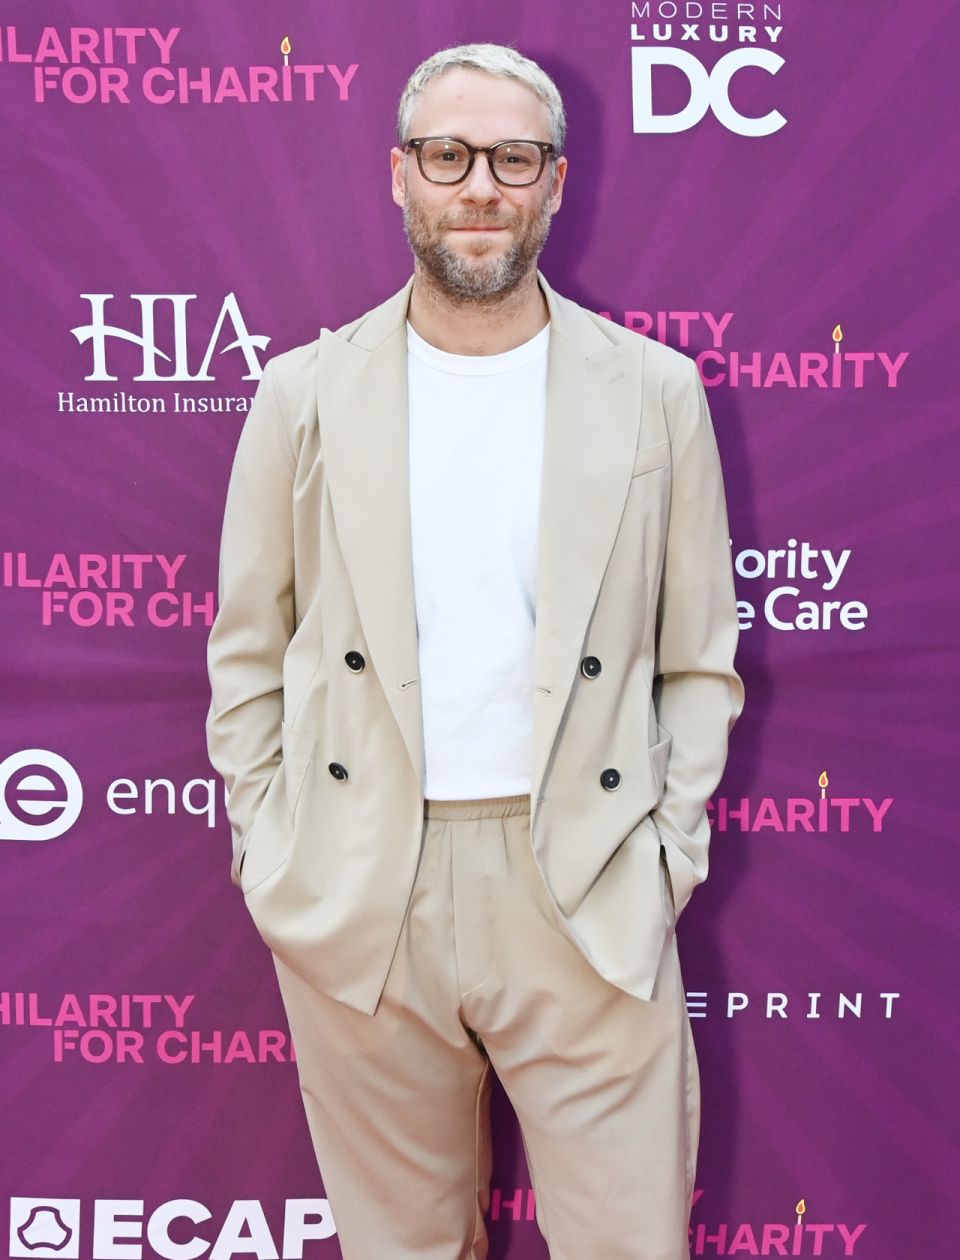 Seth Rogen attends Hilarity for Charity DC Reception in Mclean, Virginia 2022